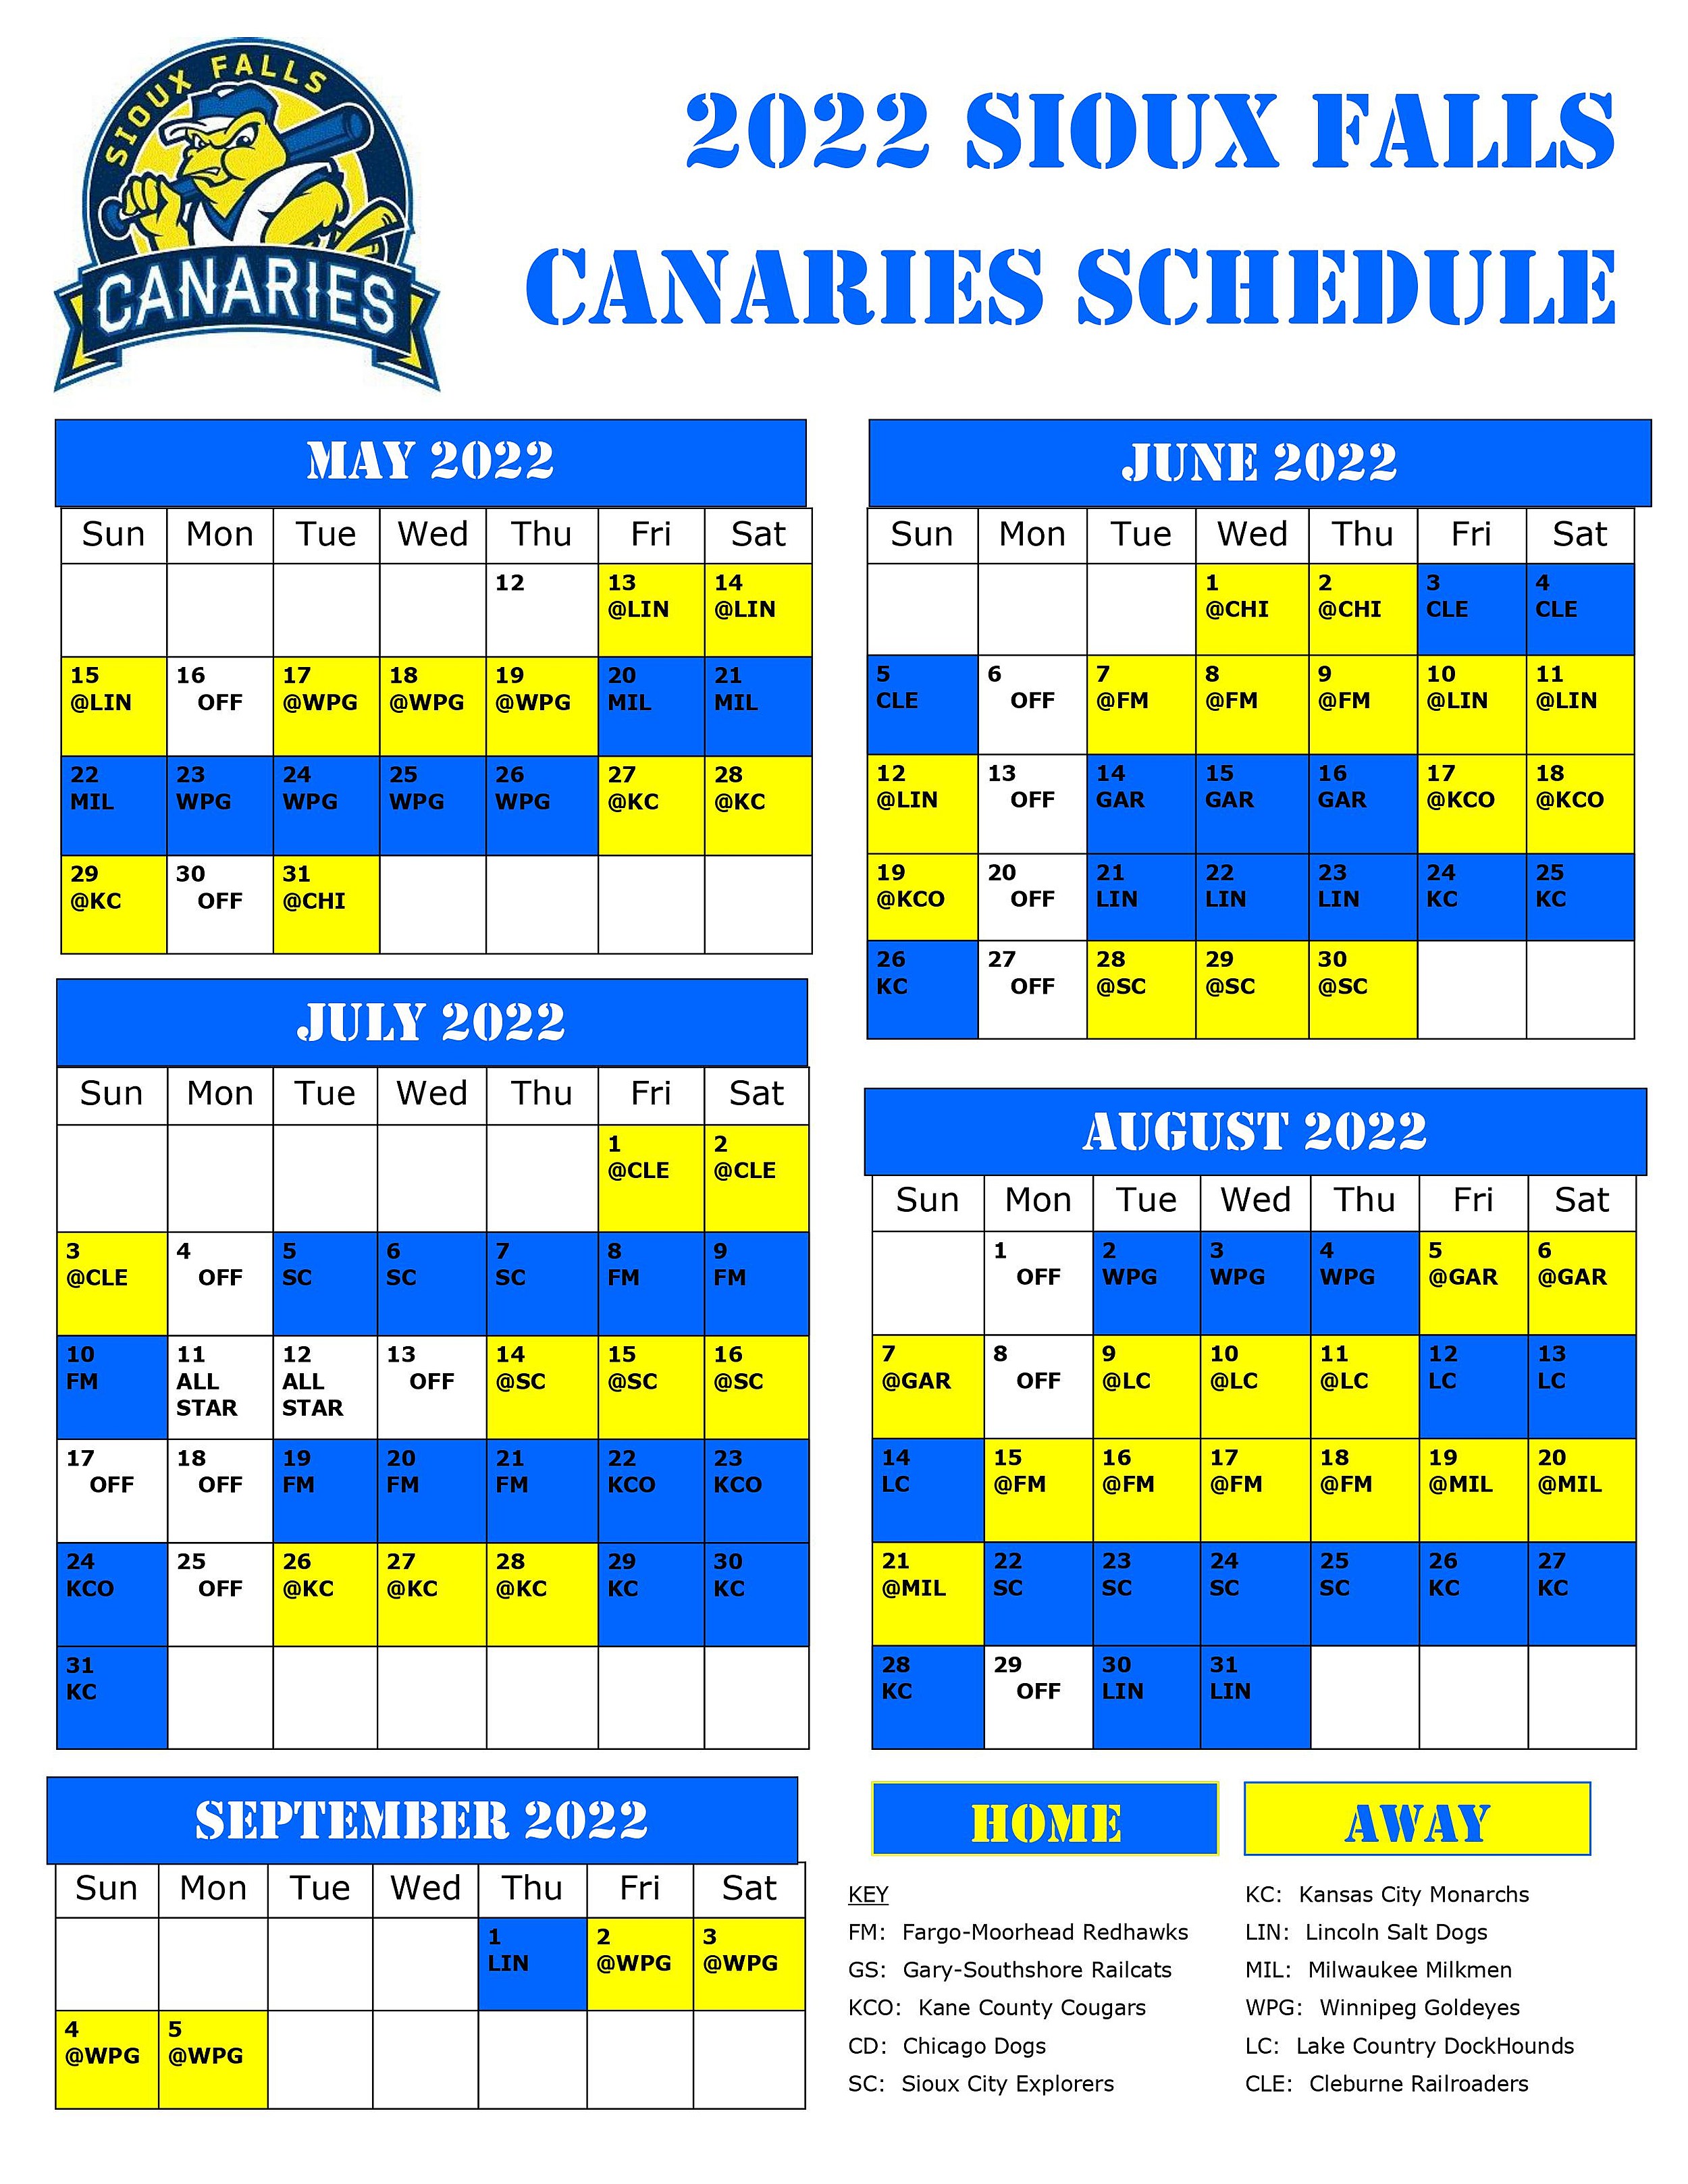 Sioux Falls Canaries 2022 Schedule